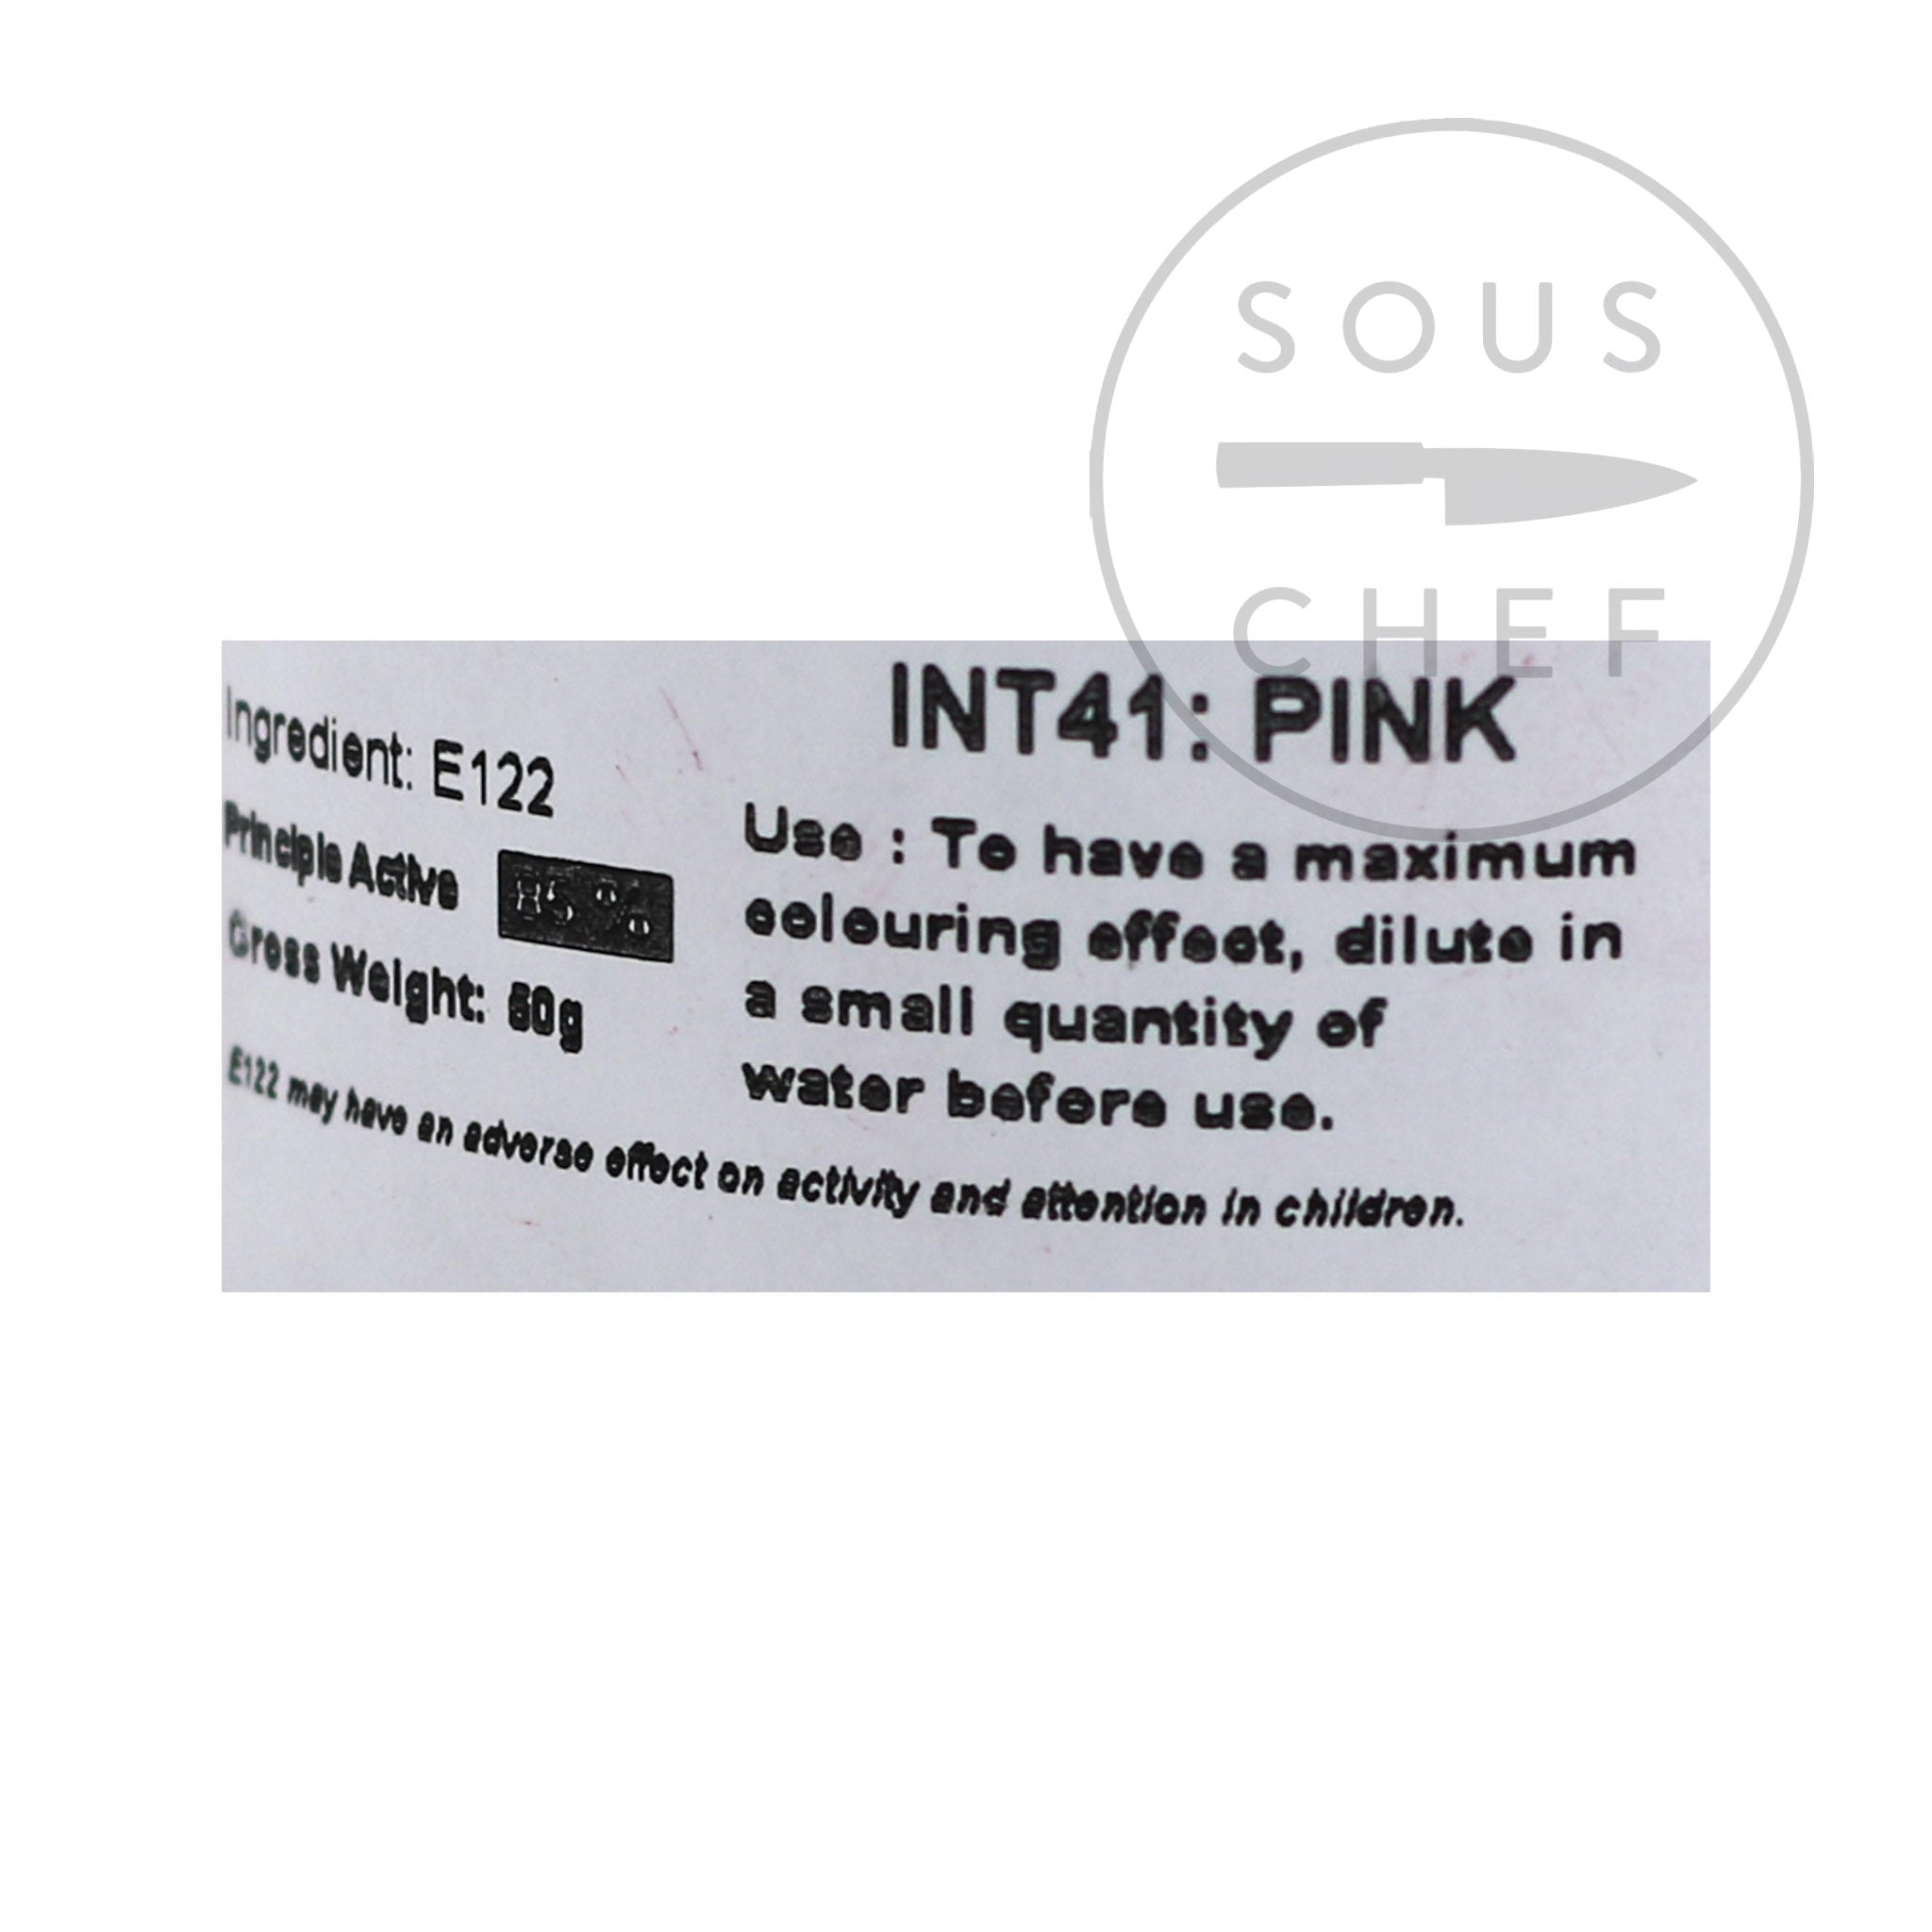 Deco Relief Intense Pink Food Colour, 50g